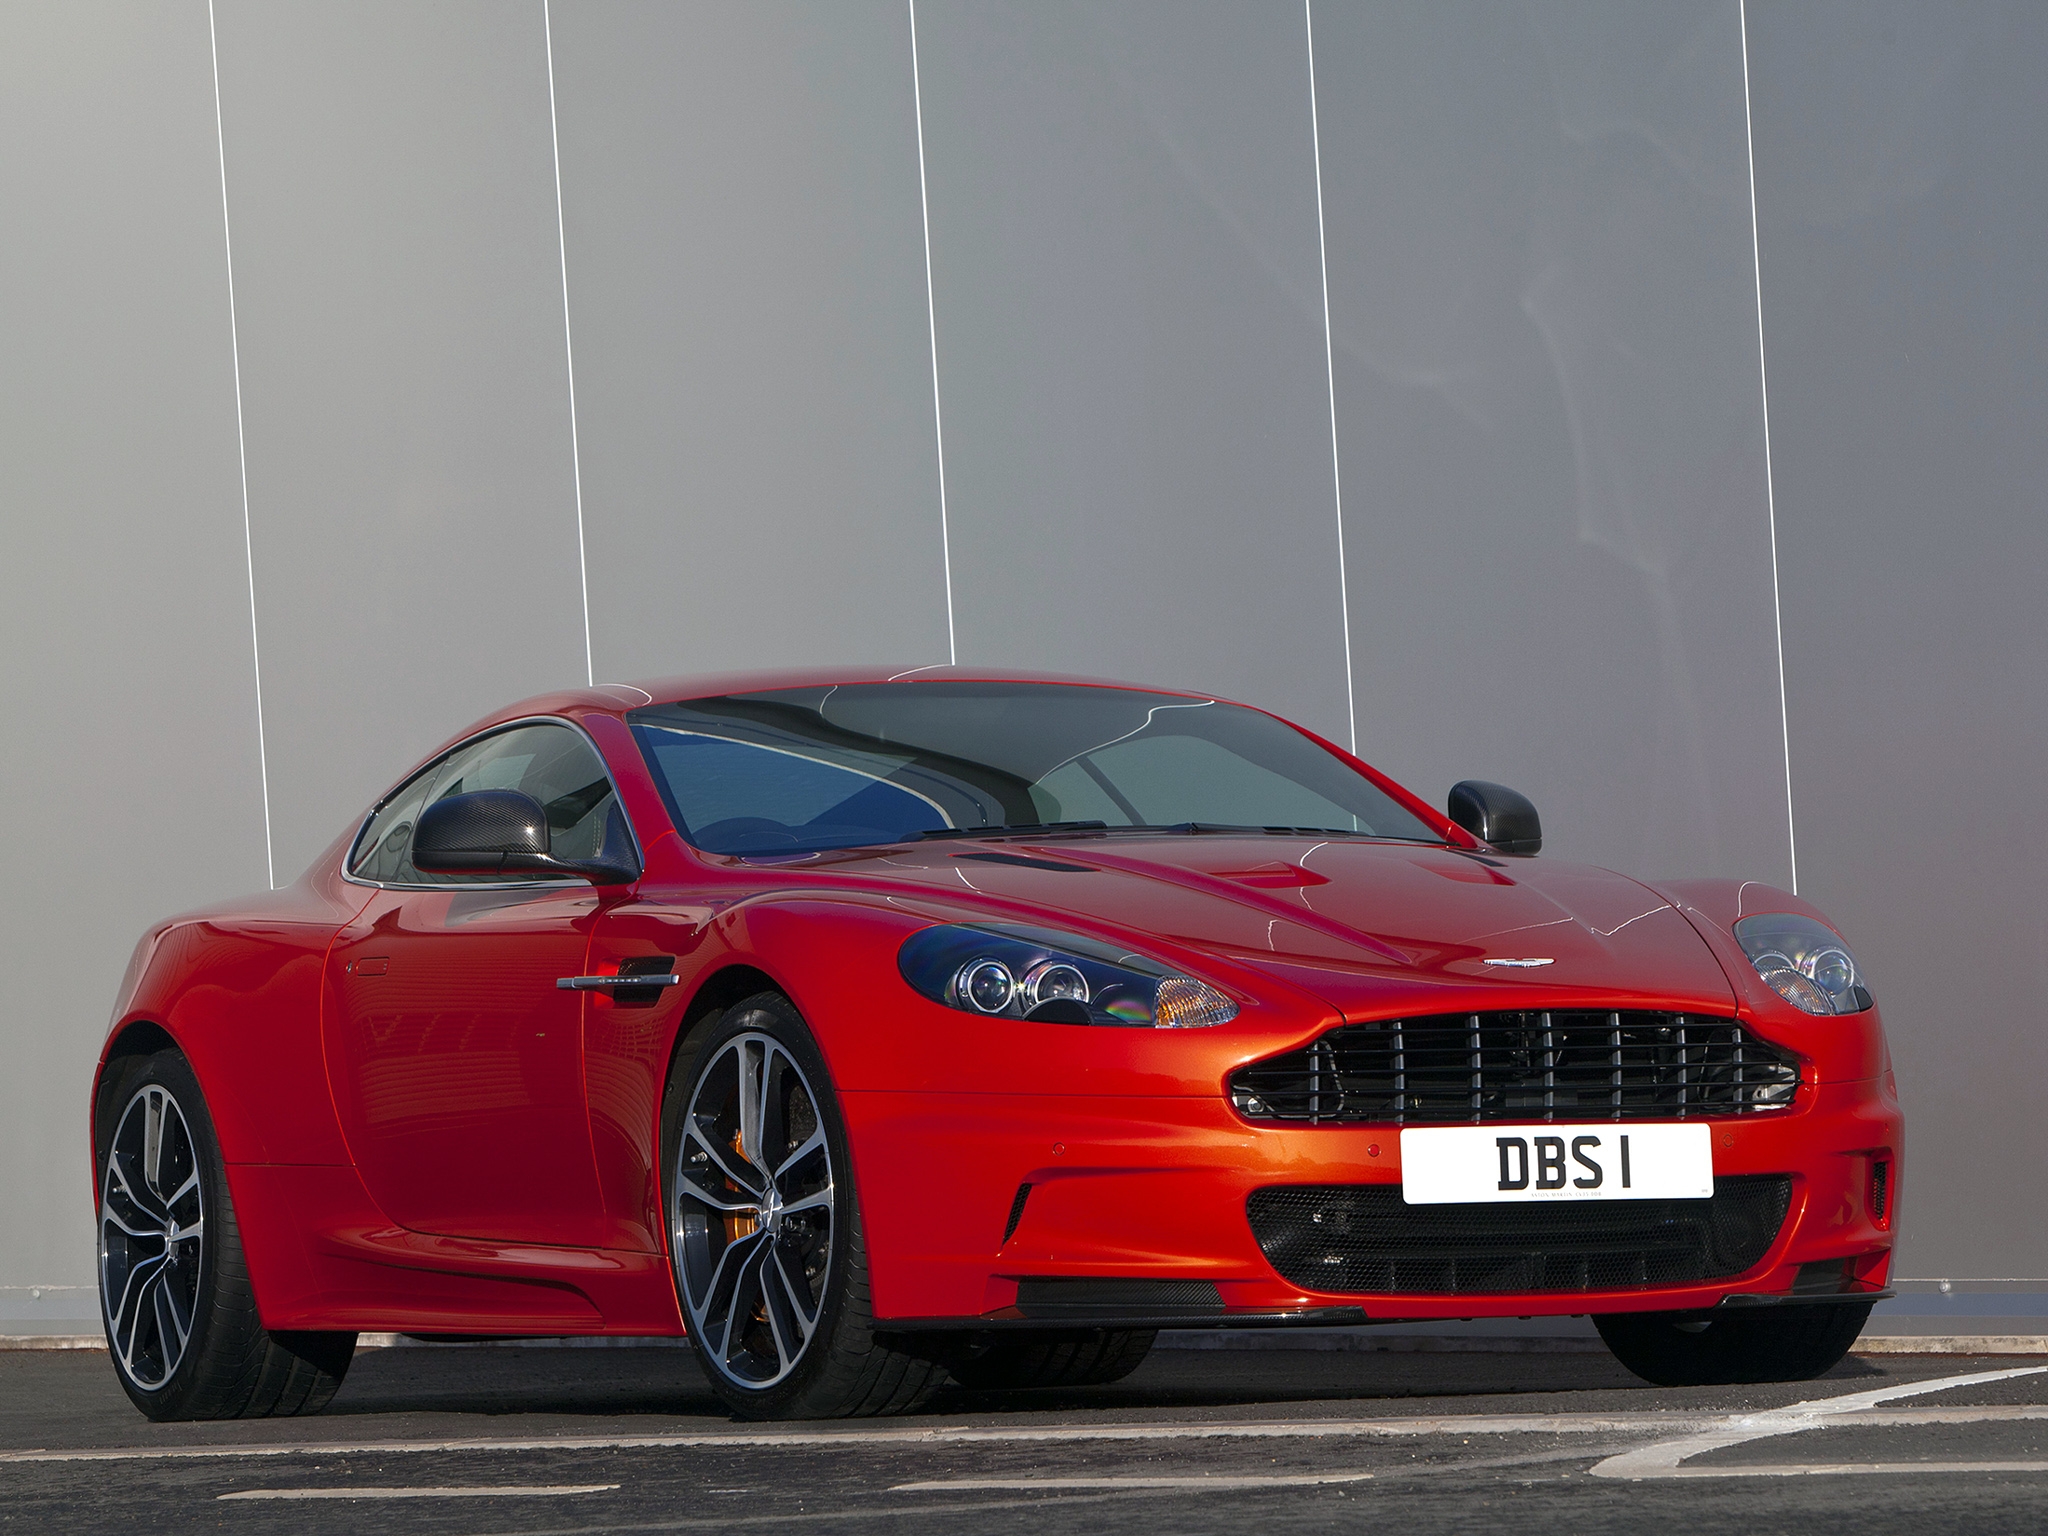 2011, aston martin, sports, cars, red, front view, dbs HD wallpaper